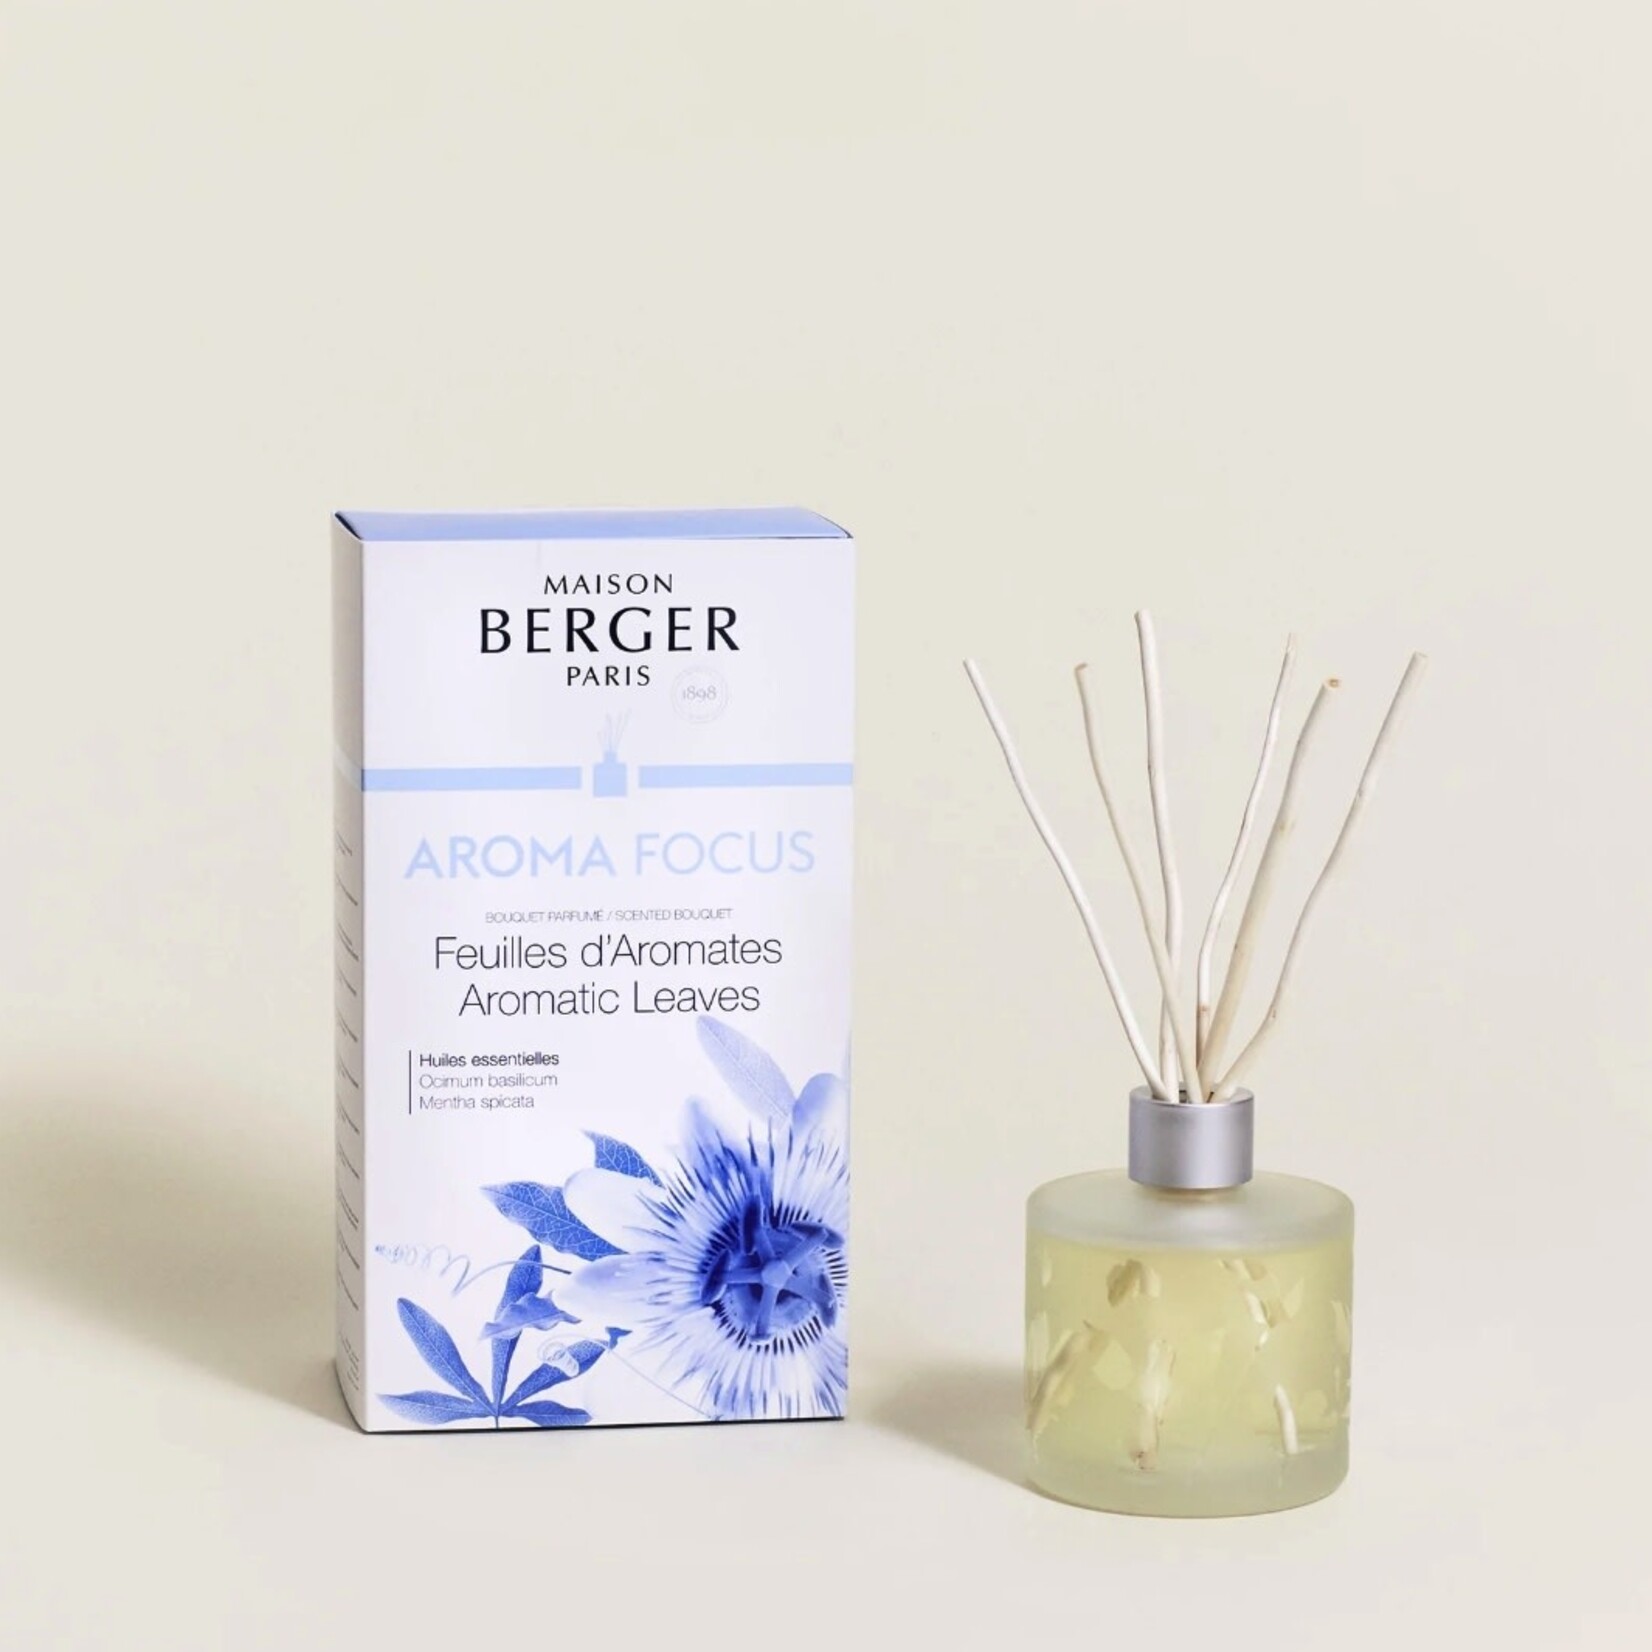 Maison Berger Paris Aroma Focus Pre-filled Reed Diffuser Aromatic Leaves